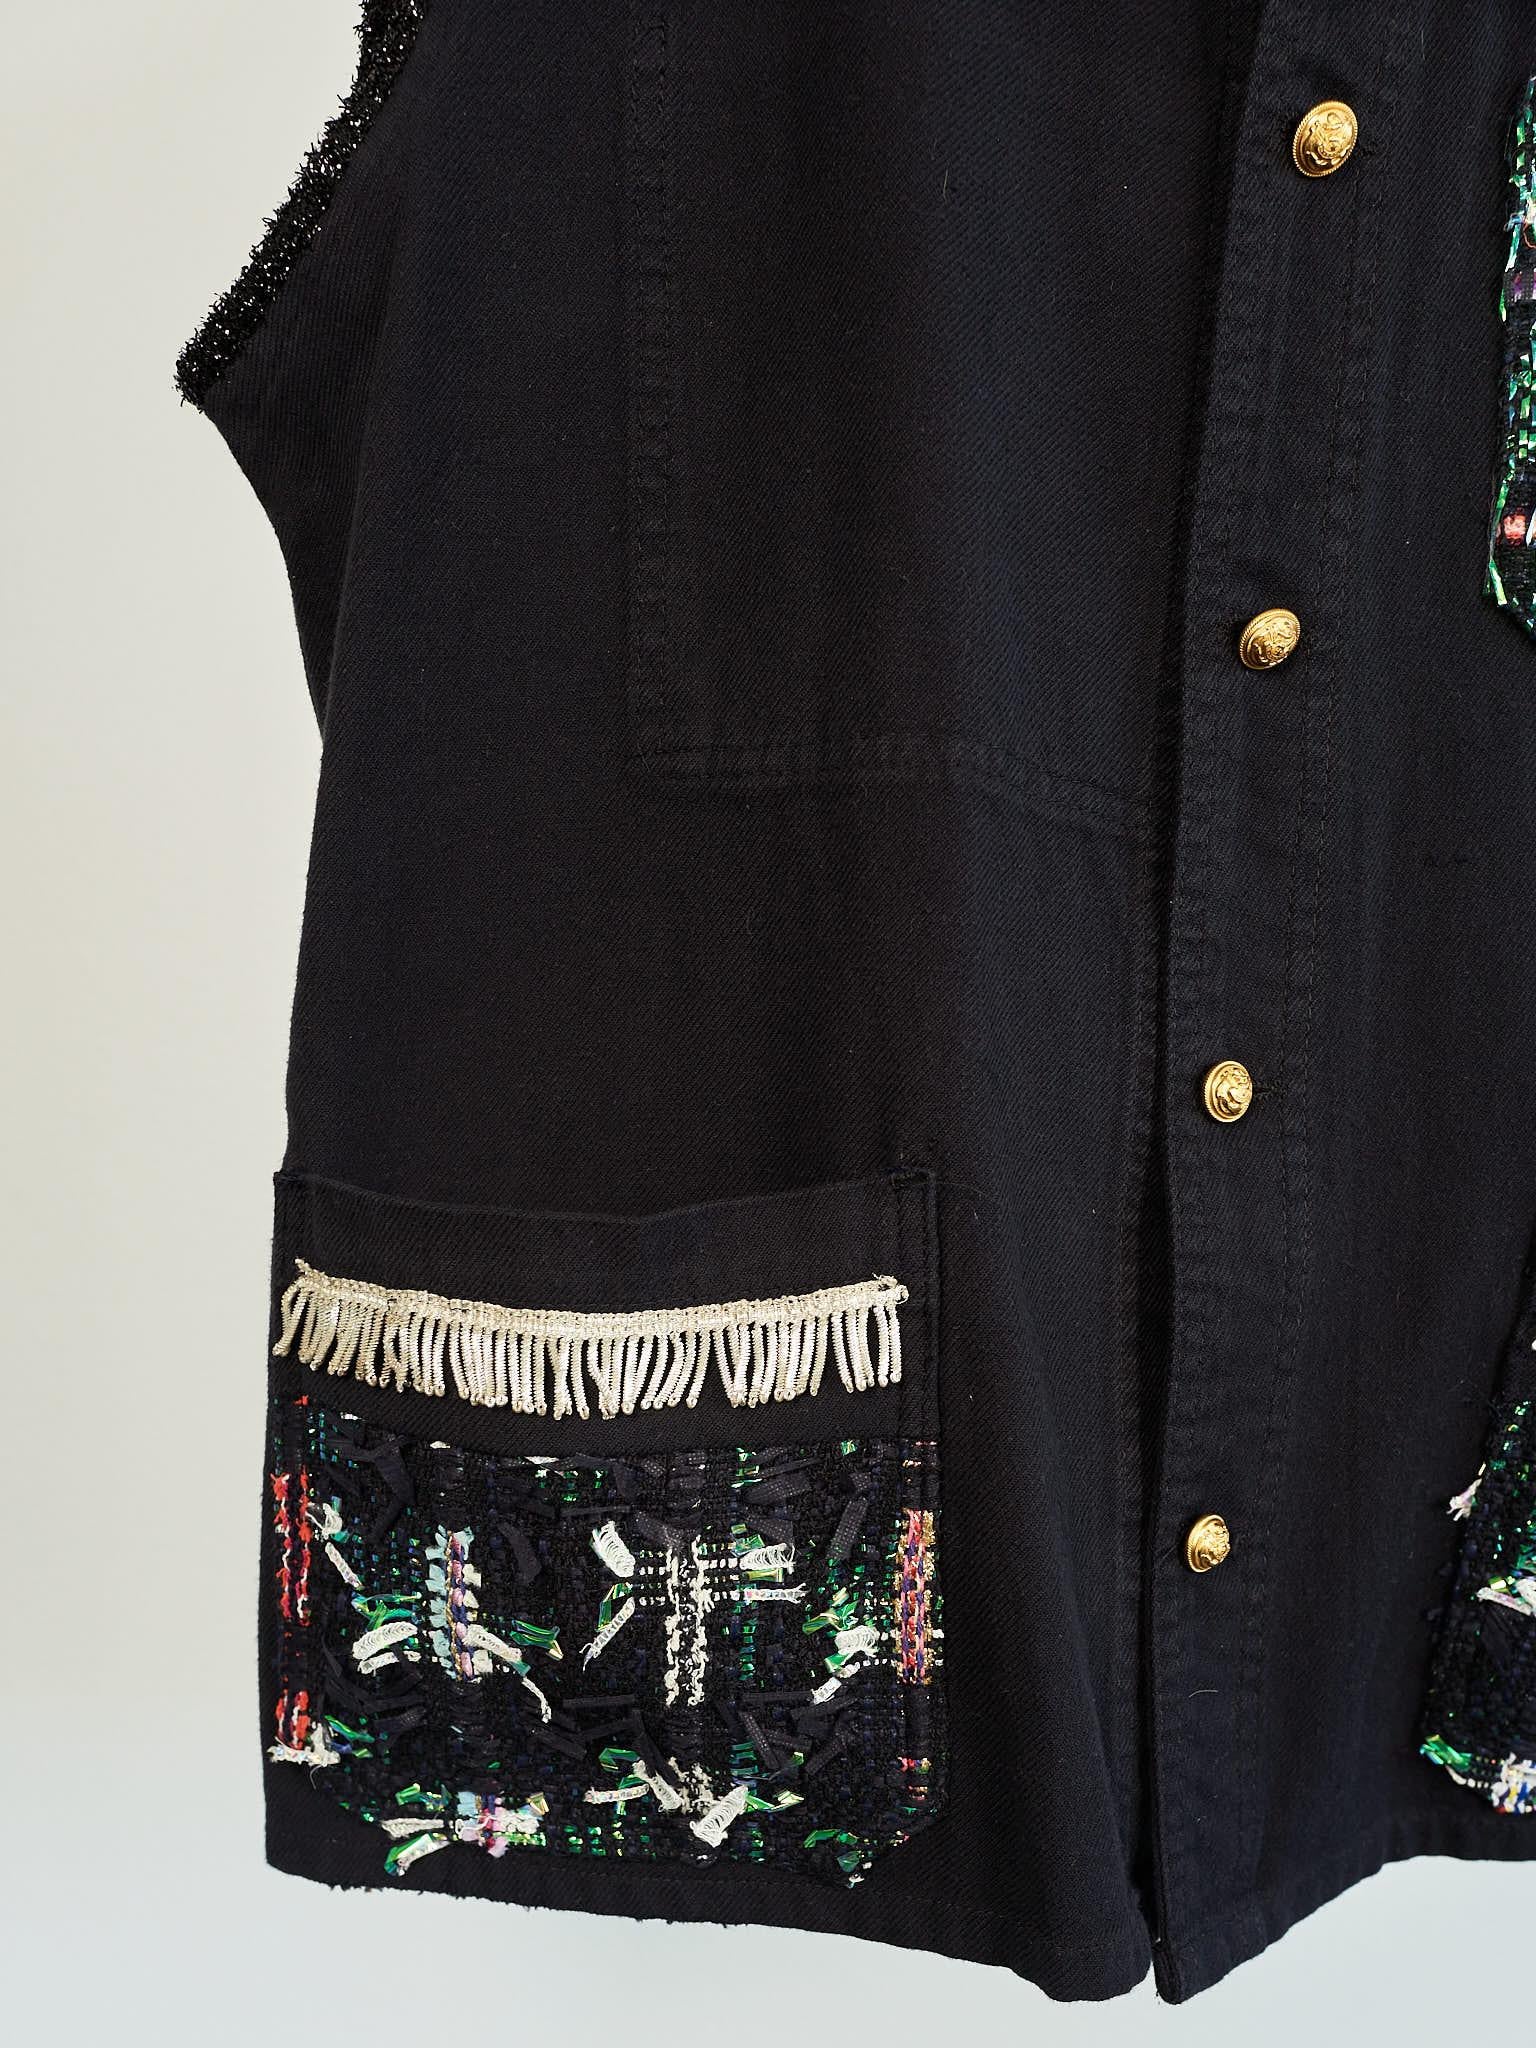 Silver Fringe Vest Sleeveless Jacket Cotton Black Green Lurex Tweed J Dauphin In New Condition In Los Angeles, CA